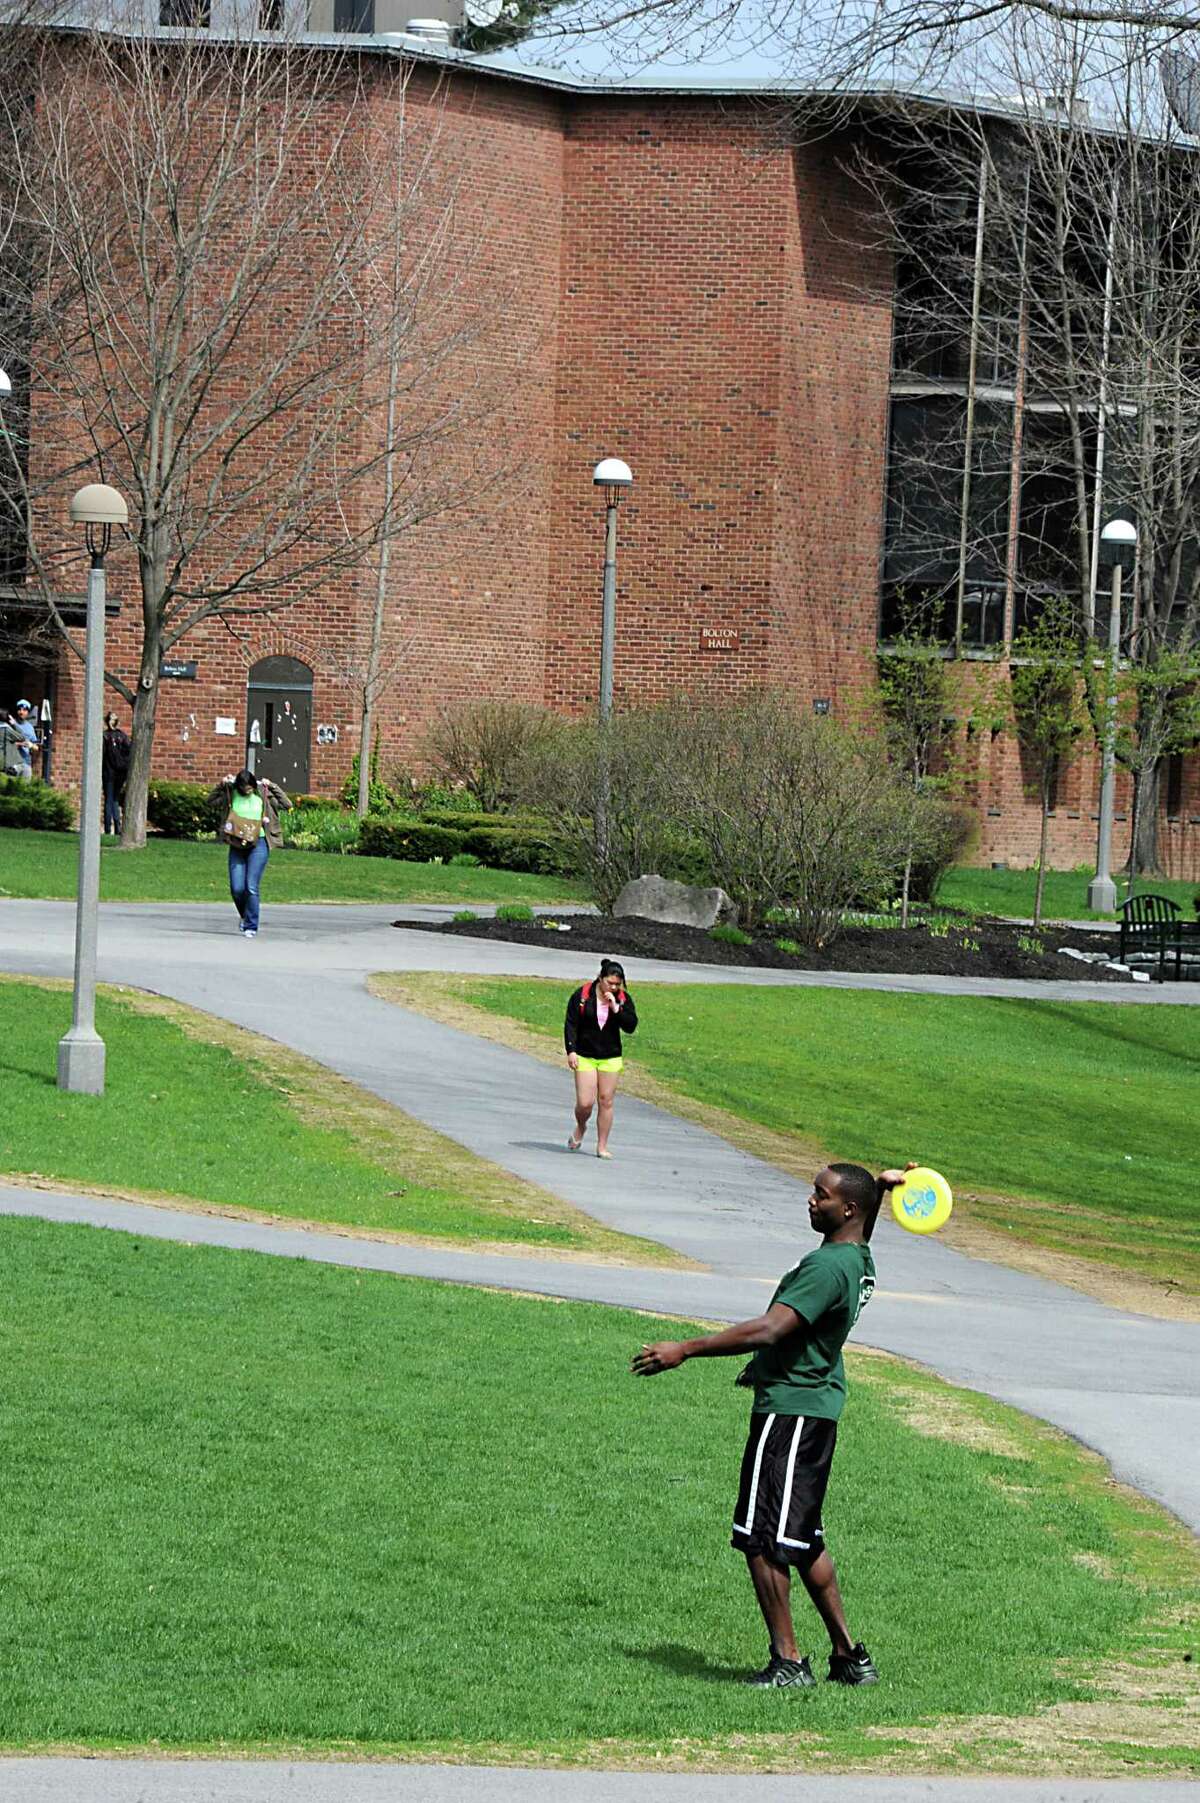 Students walk and play frisbee on the Skidmore College campus on Tuesday May 6, 2014 in Saratoga Springs, N.Y. (Lori Van Buren / Times Union)